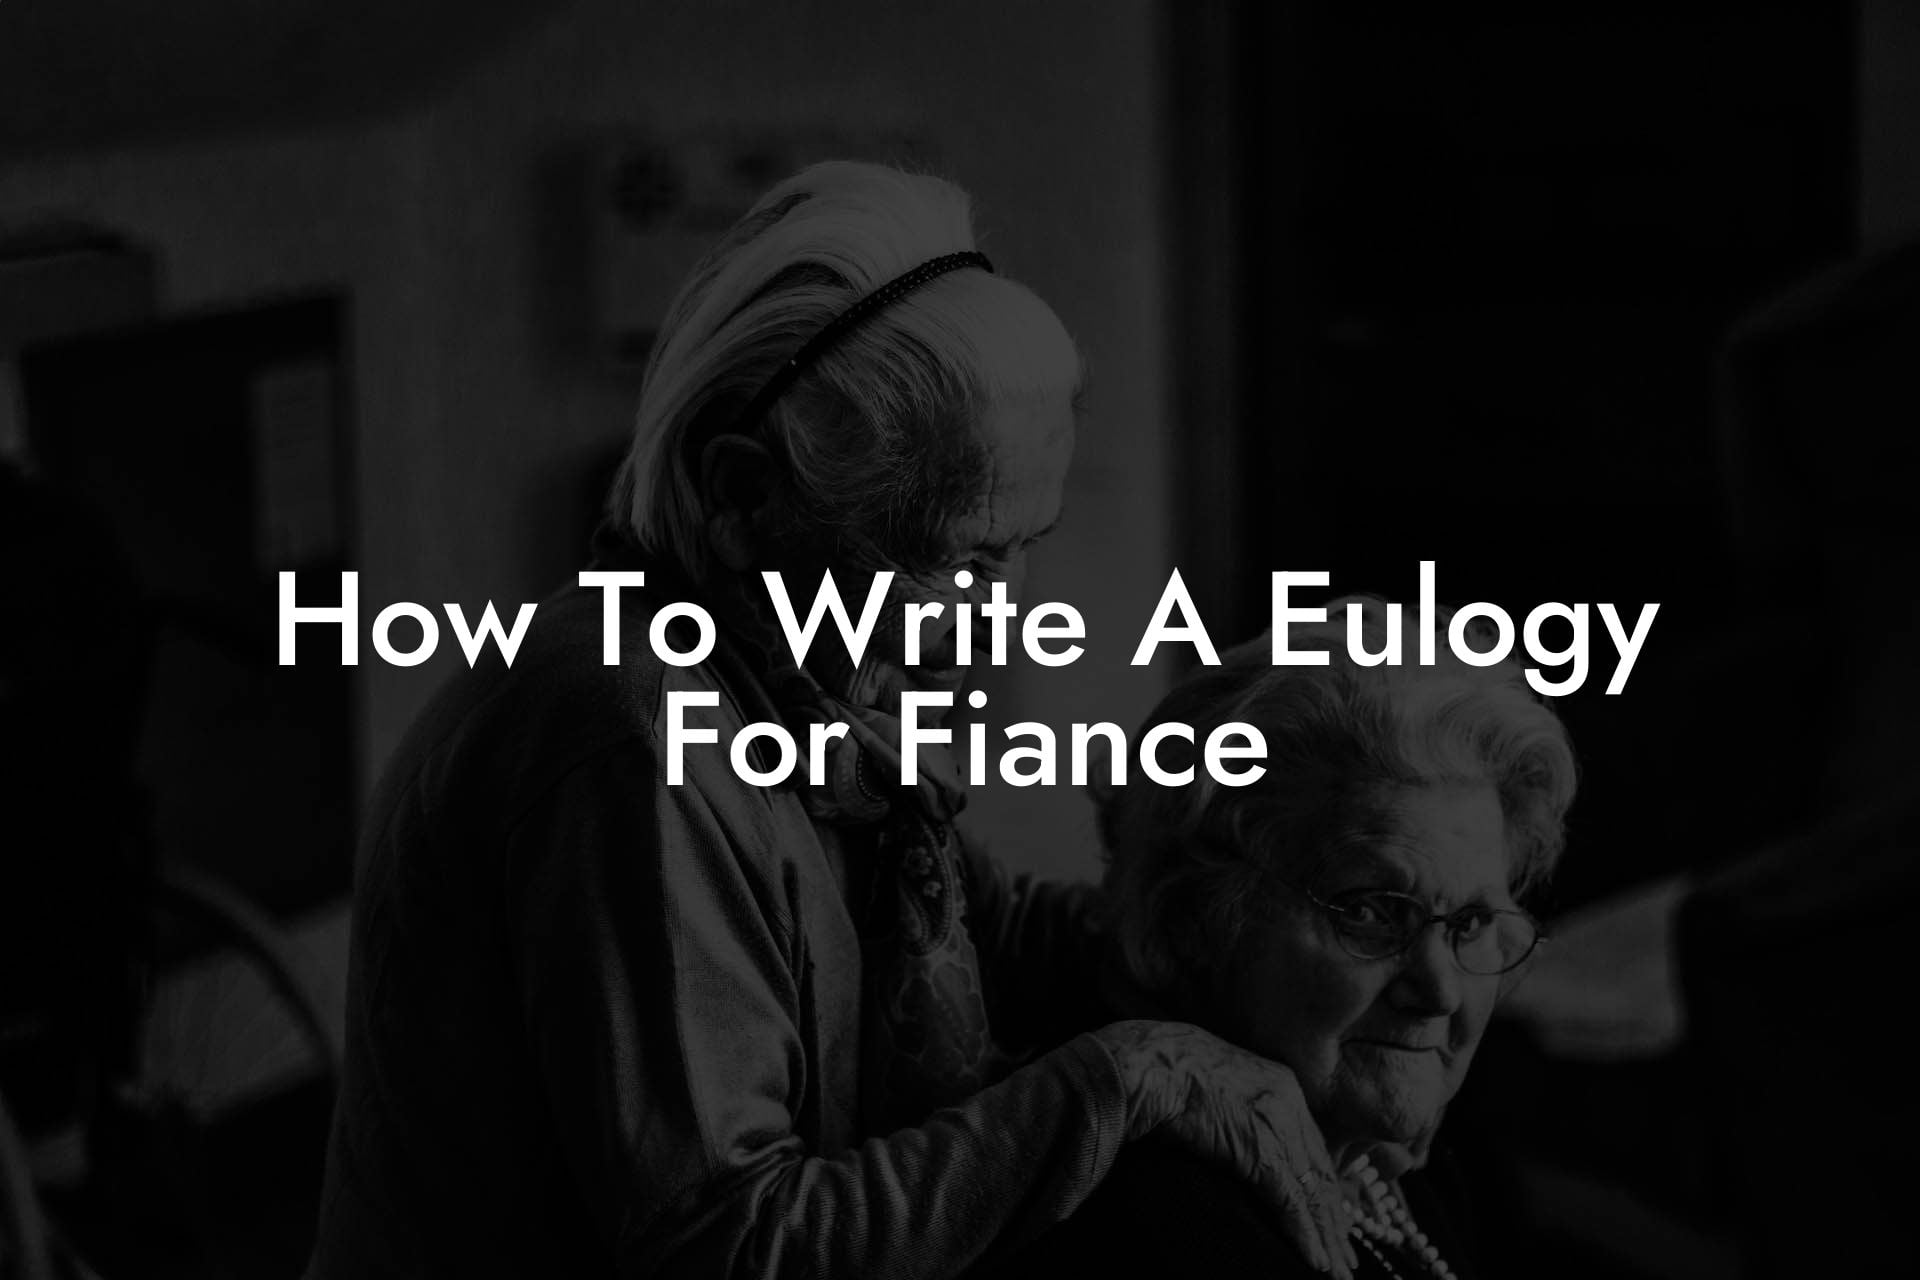 How To Write A Eulogy For Fiance